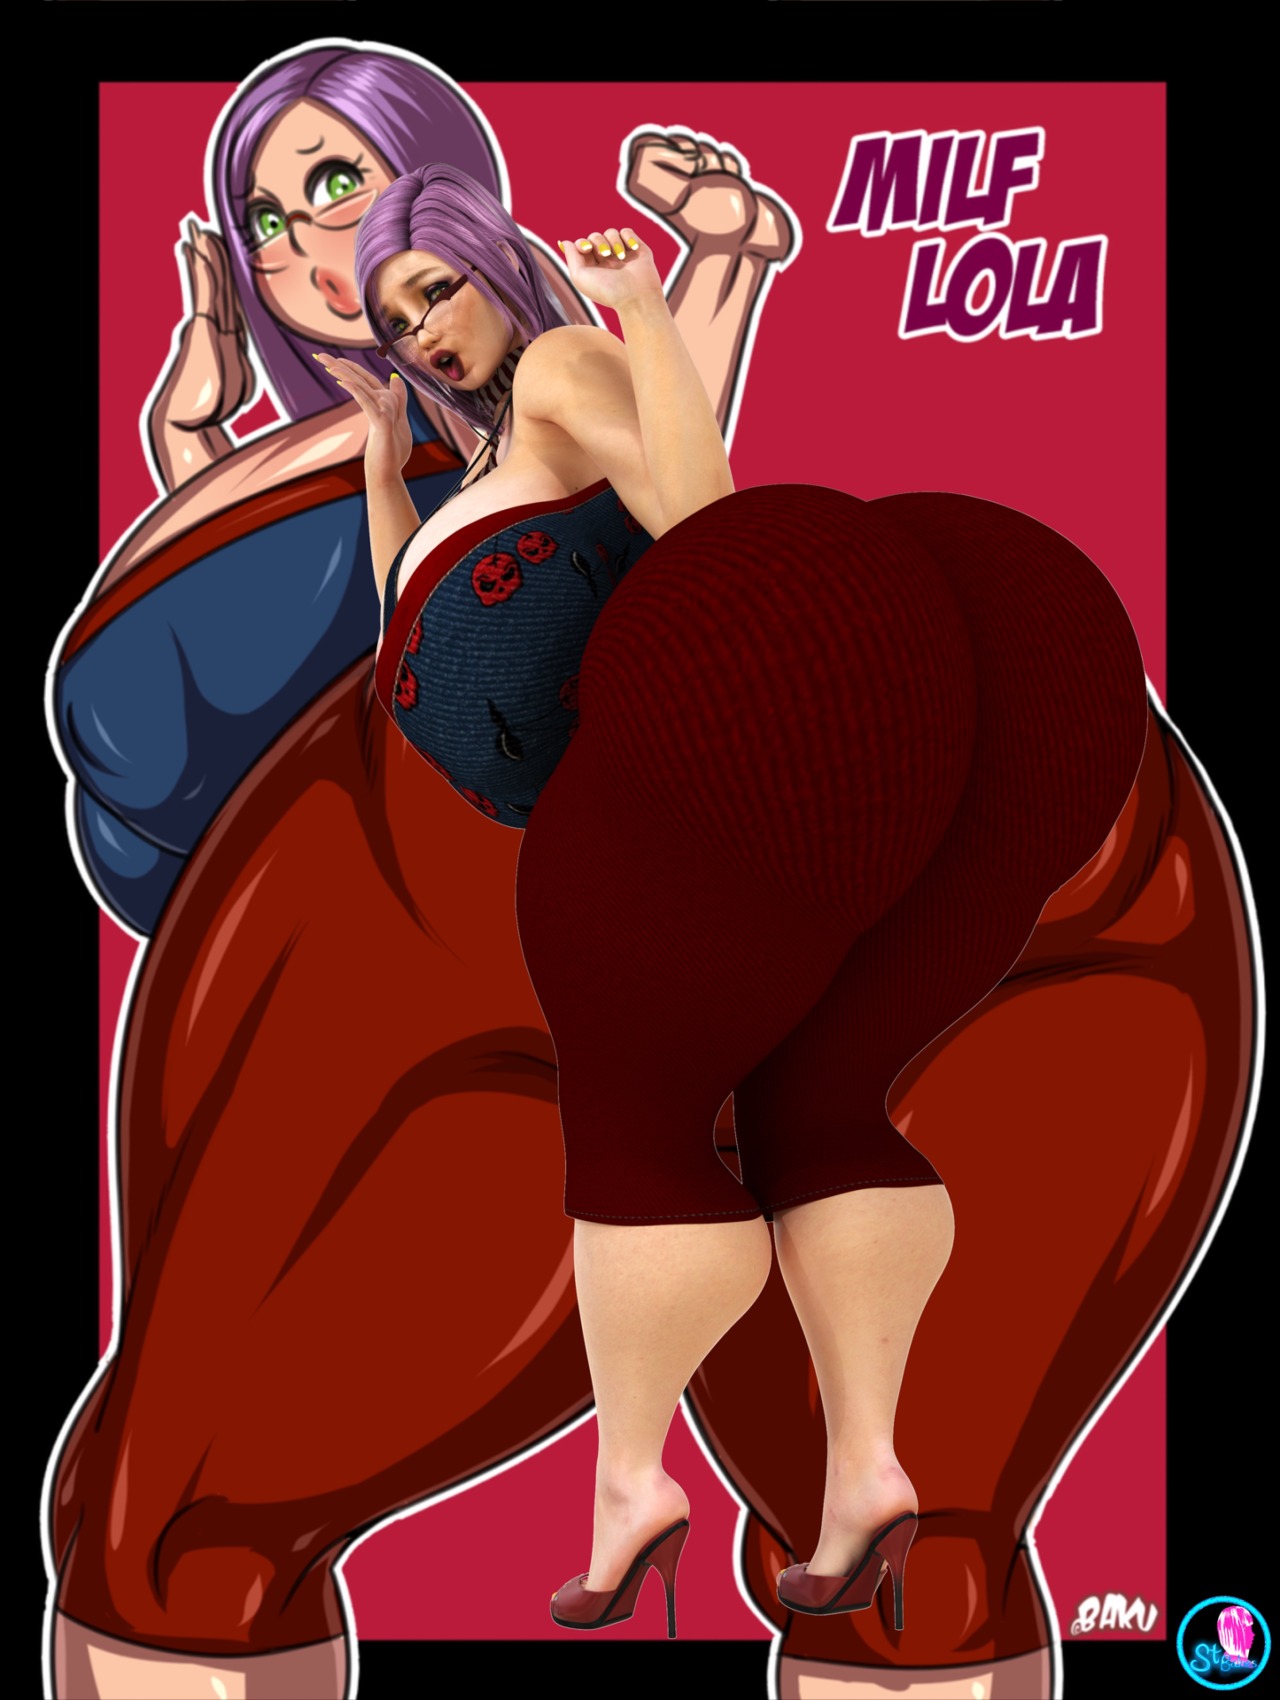 supertitoblog:  Hey guys, after getting a lovely gift of Older Lola from @bakudemon